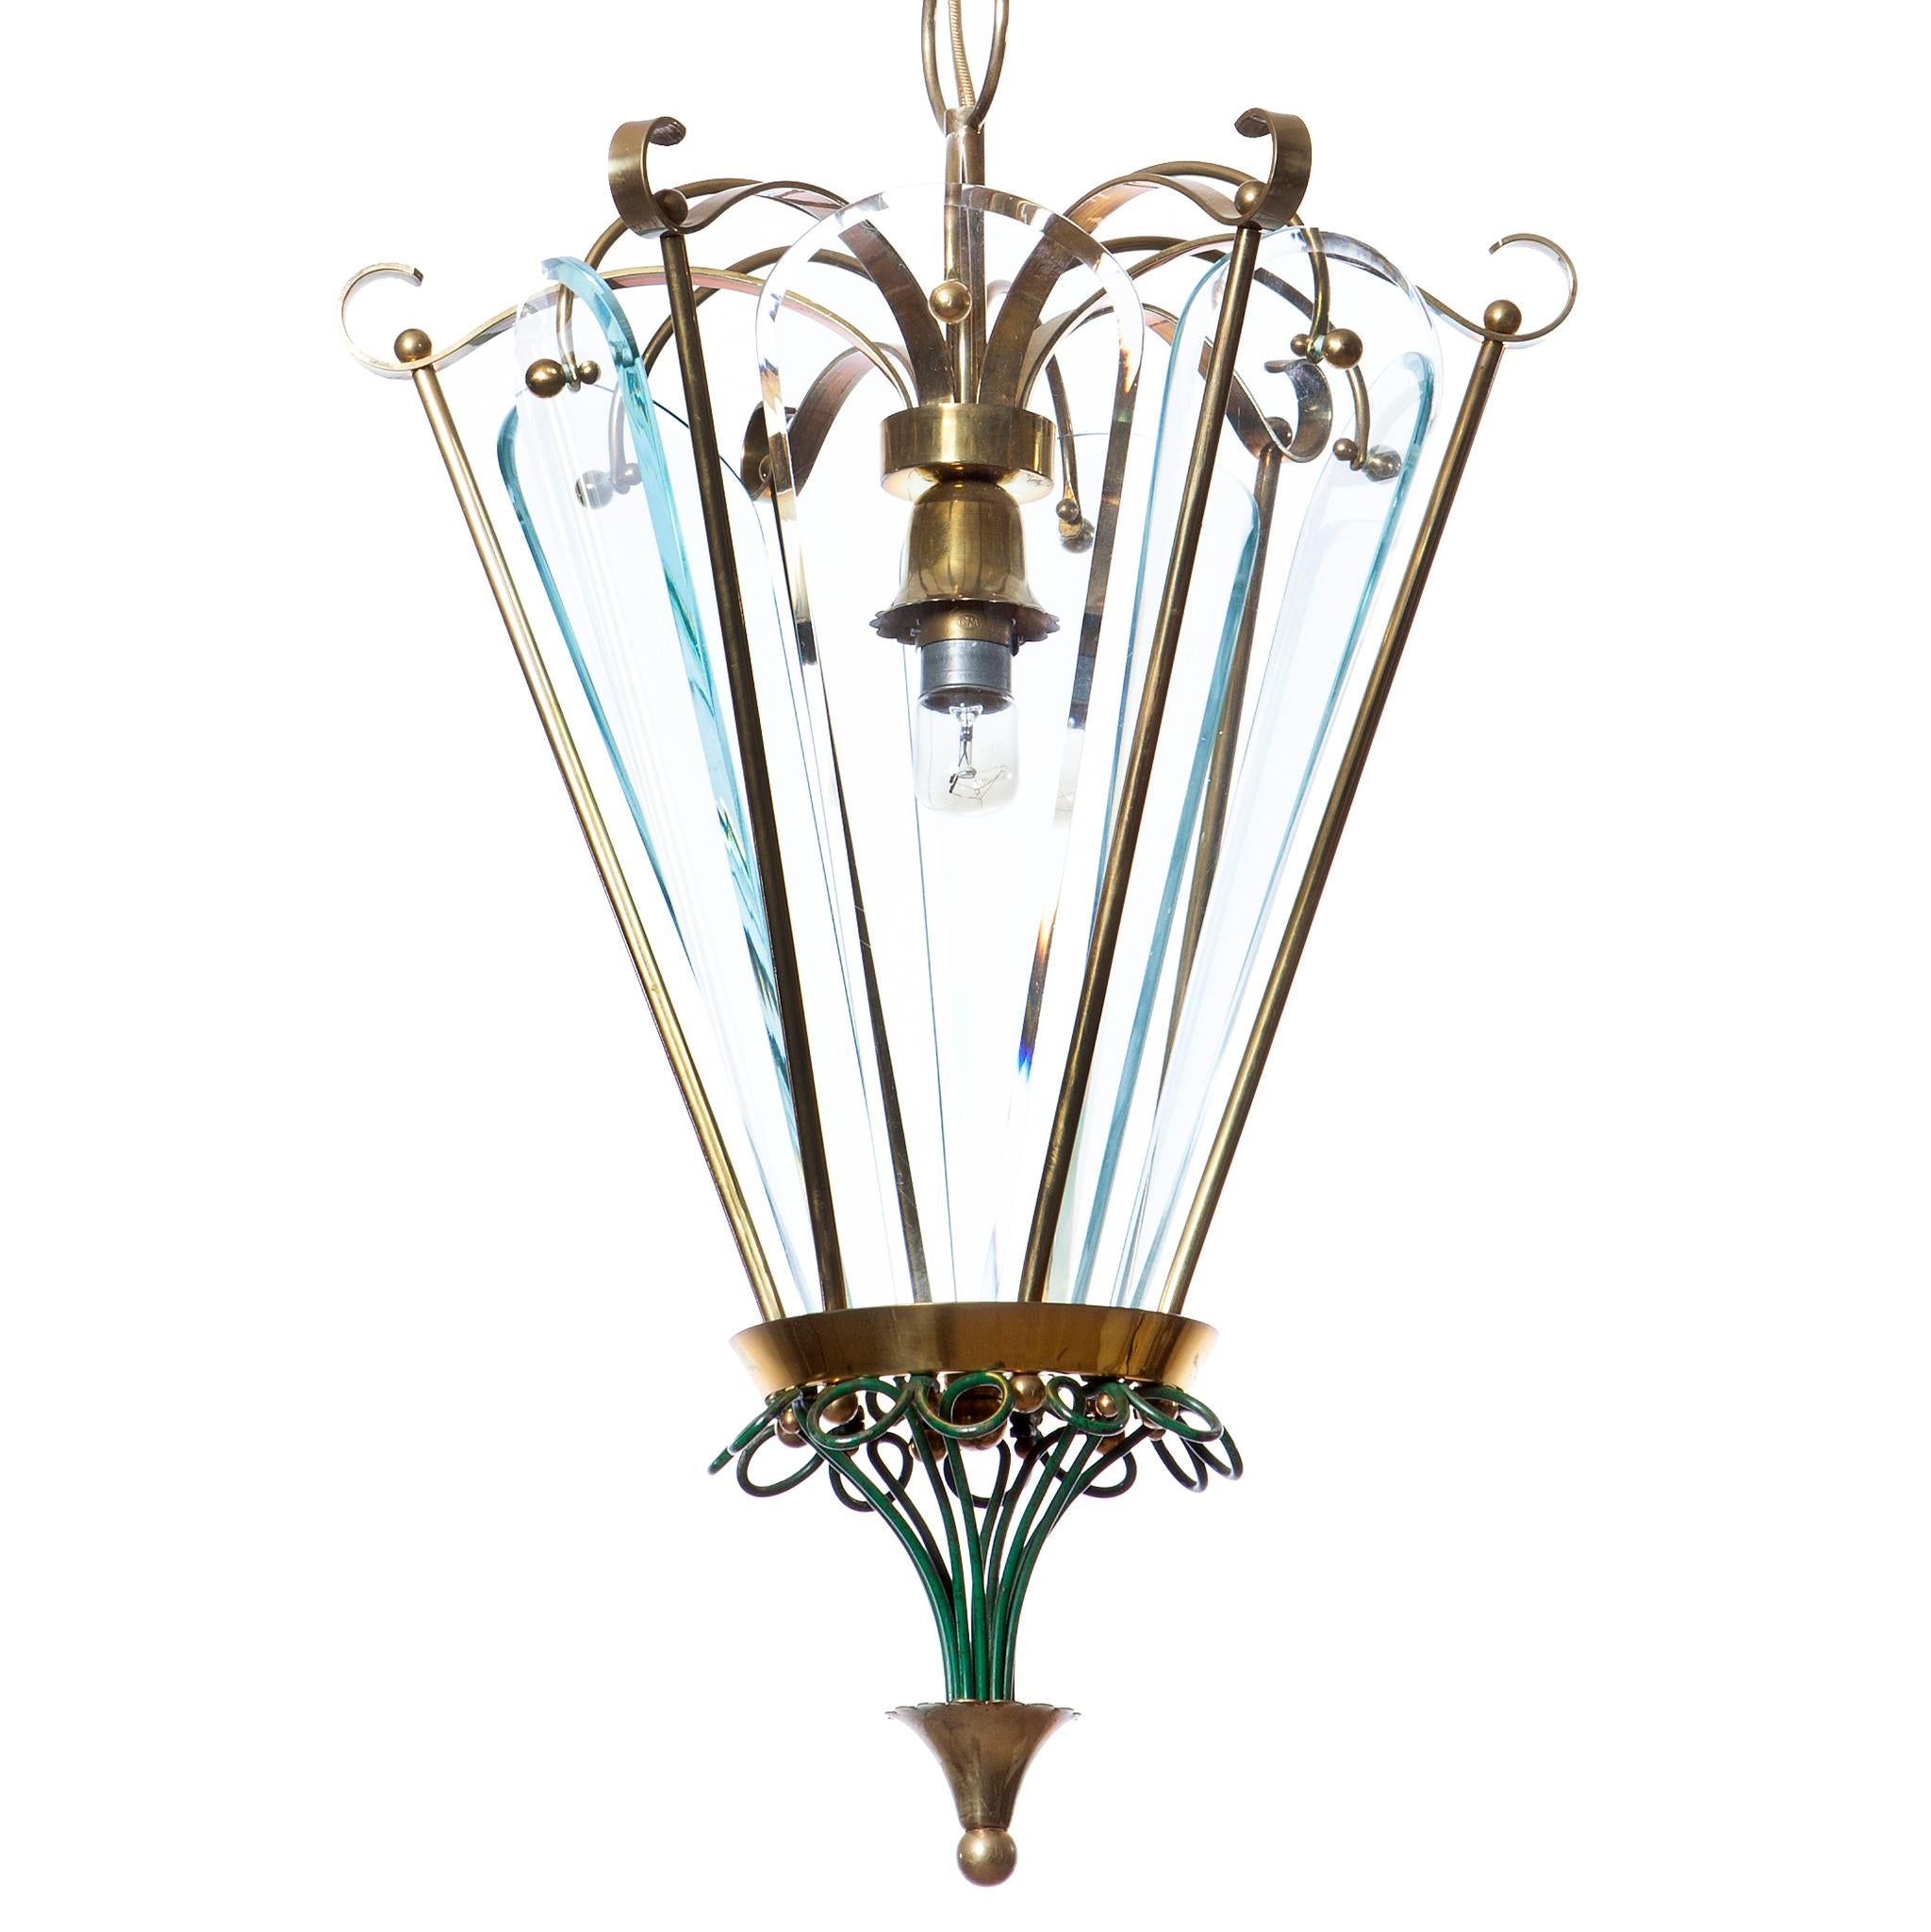 Beautiful classic lantern with 6-faceted glasses, nicely decorated with brass and green colored polychrome wiring. 1x bajonet fitting, circa 1940s.